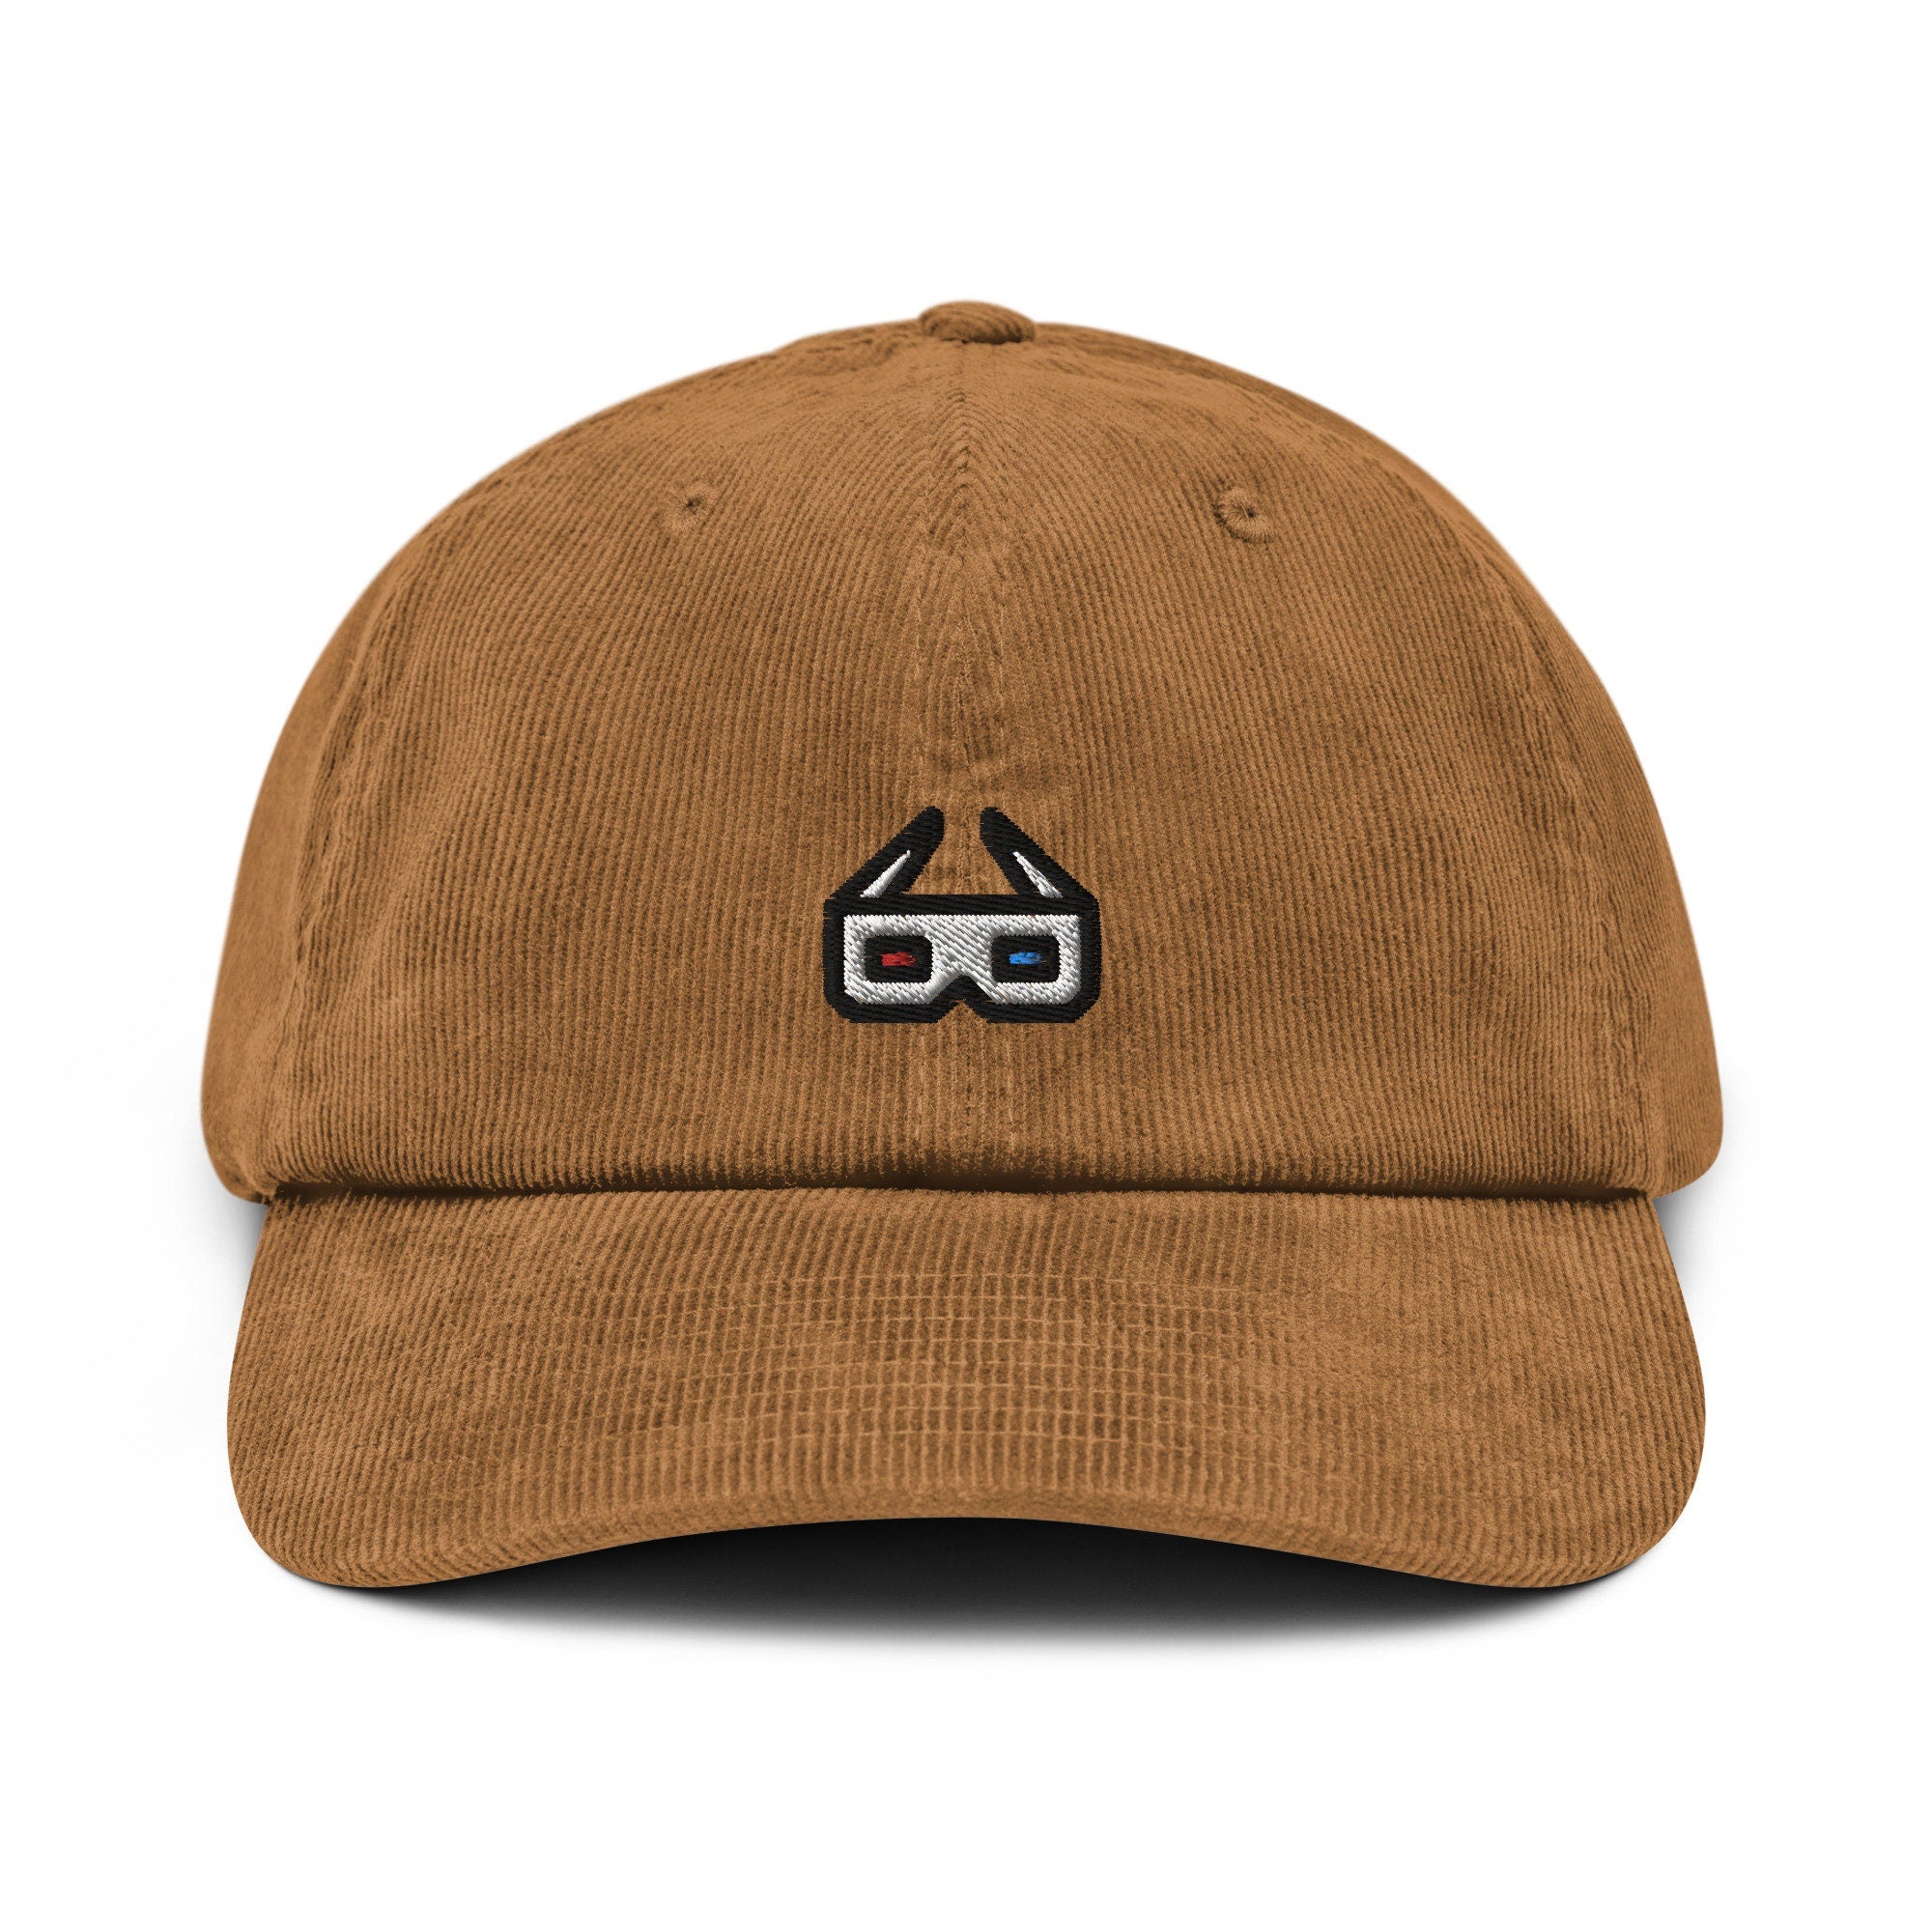 3D Glasses Corduroy Hat, Handmade Embroidered Corduroy Dad Cap - Multiple Colors